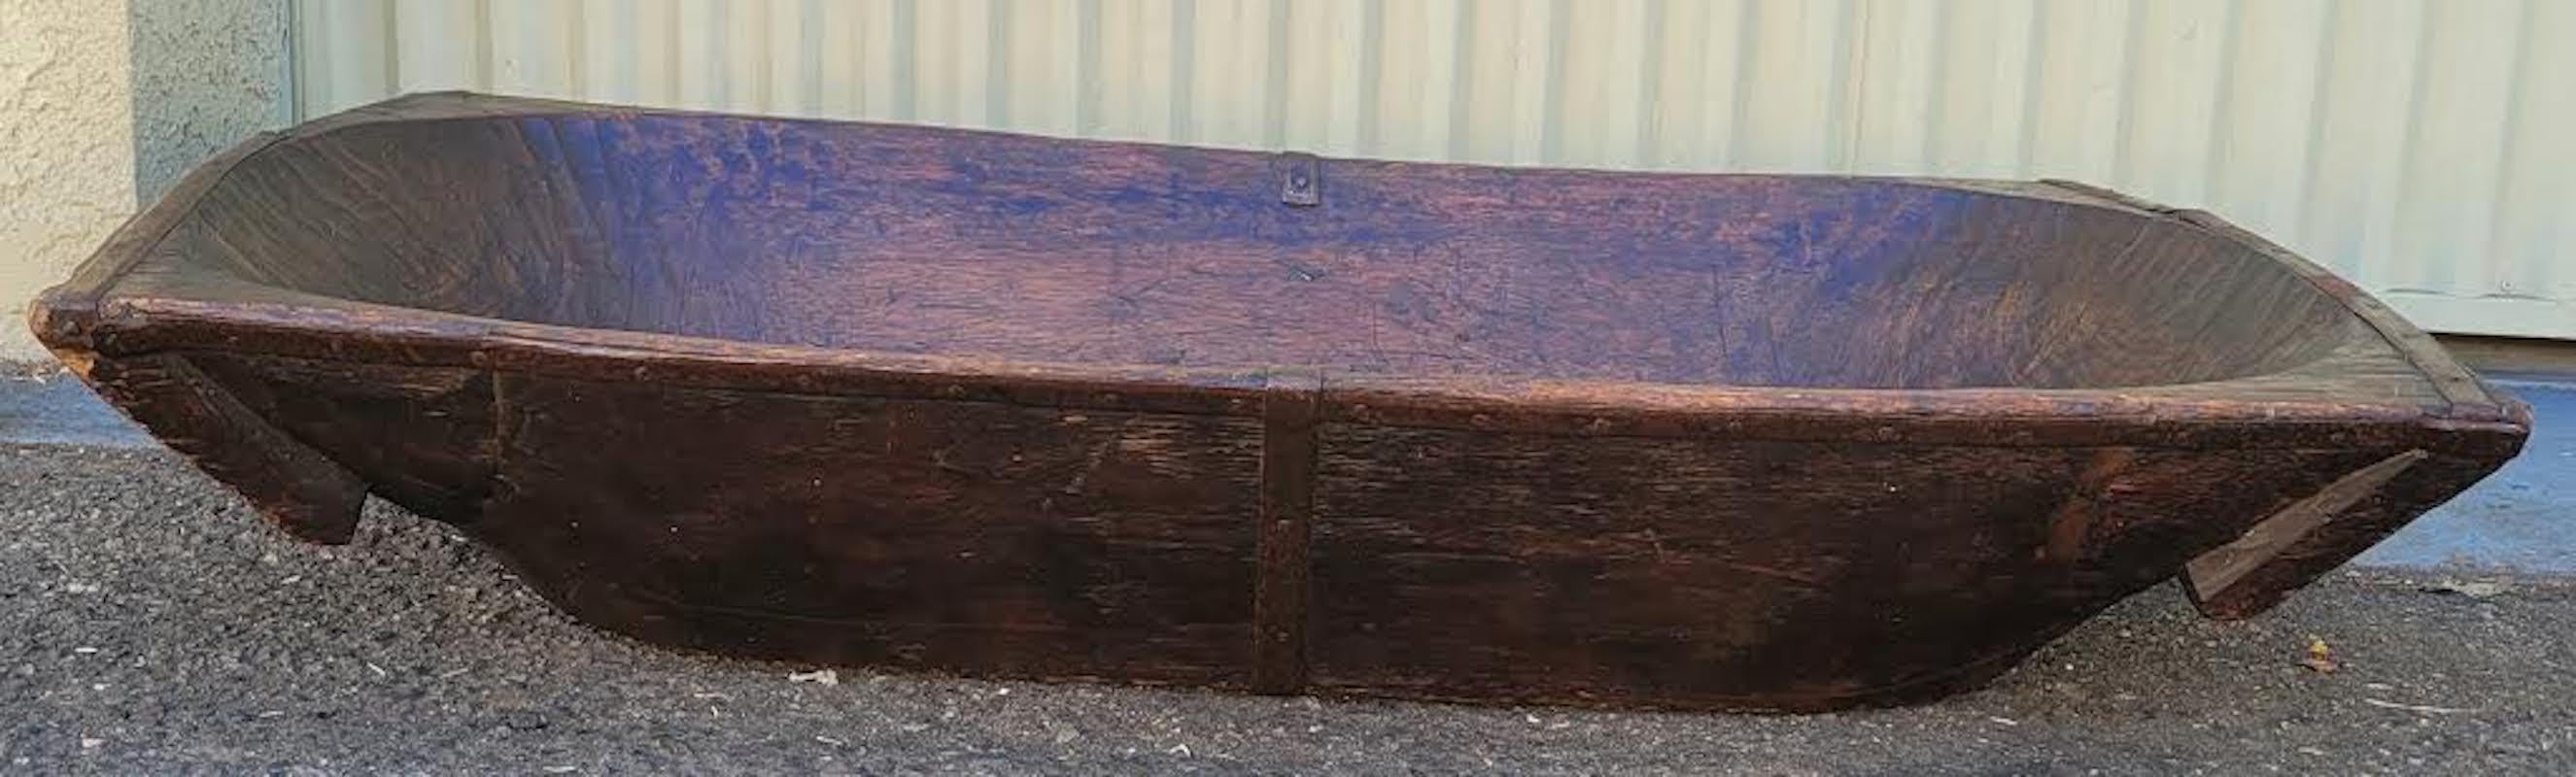 Country 18th C Monumental Farm Trough For Sale